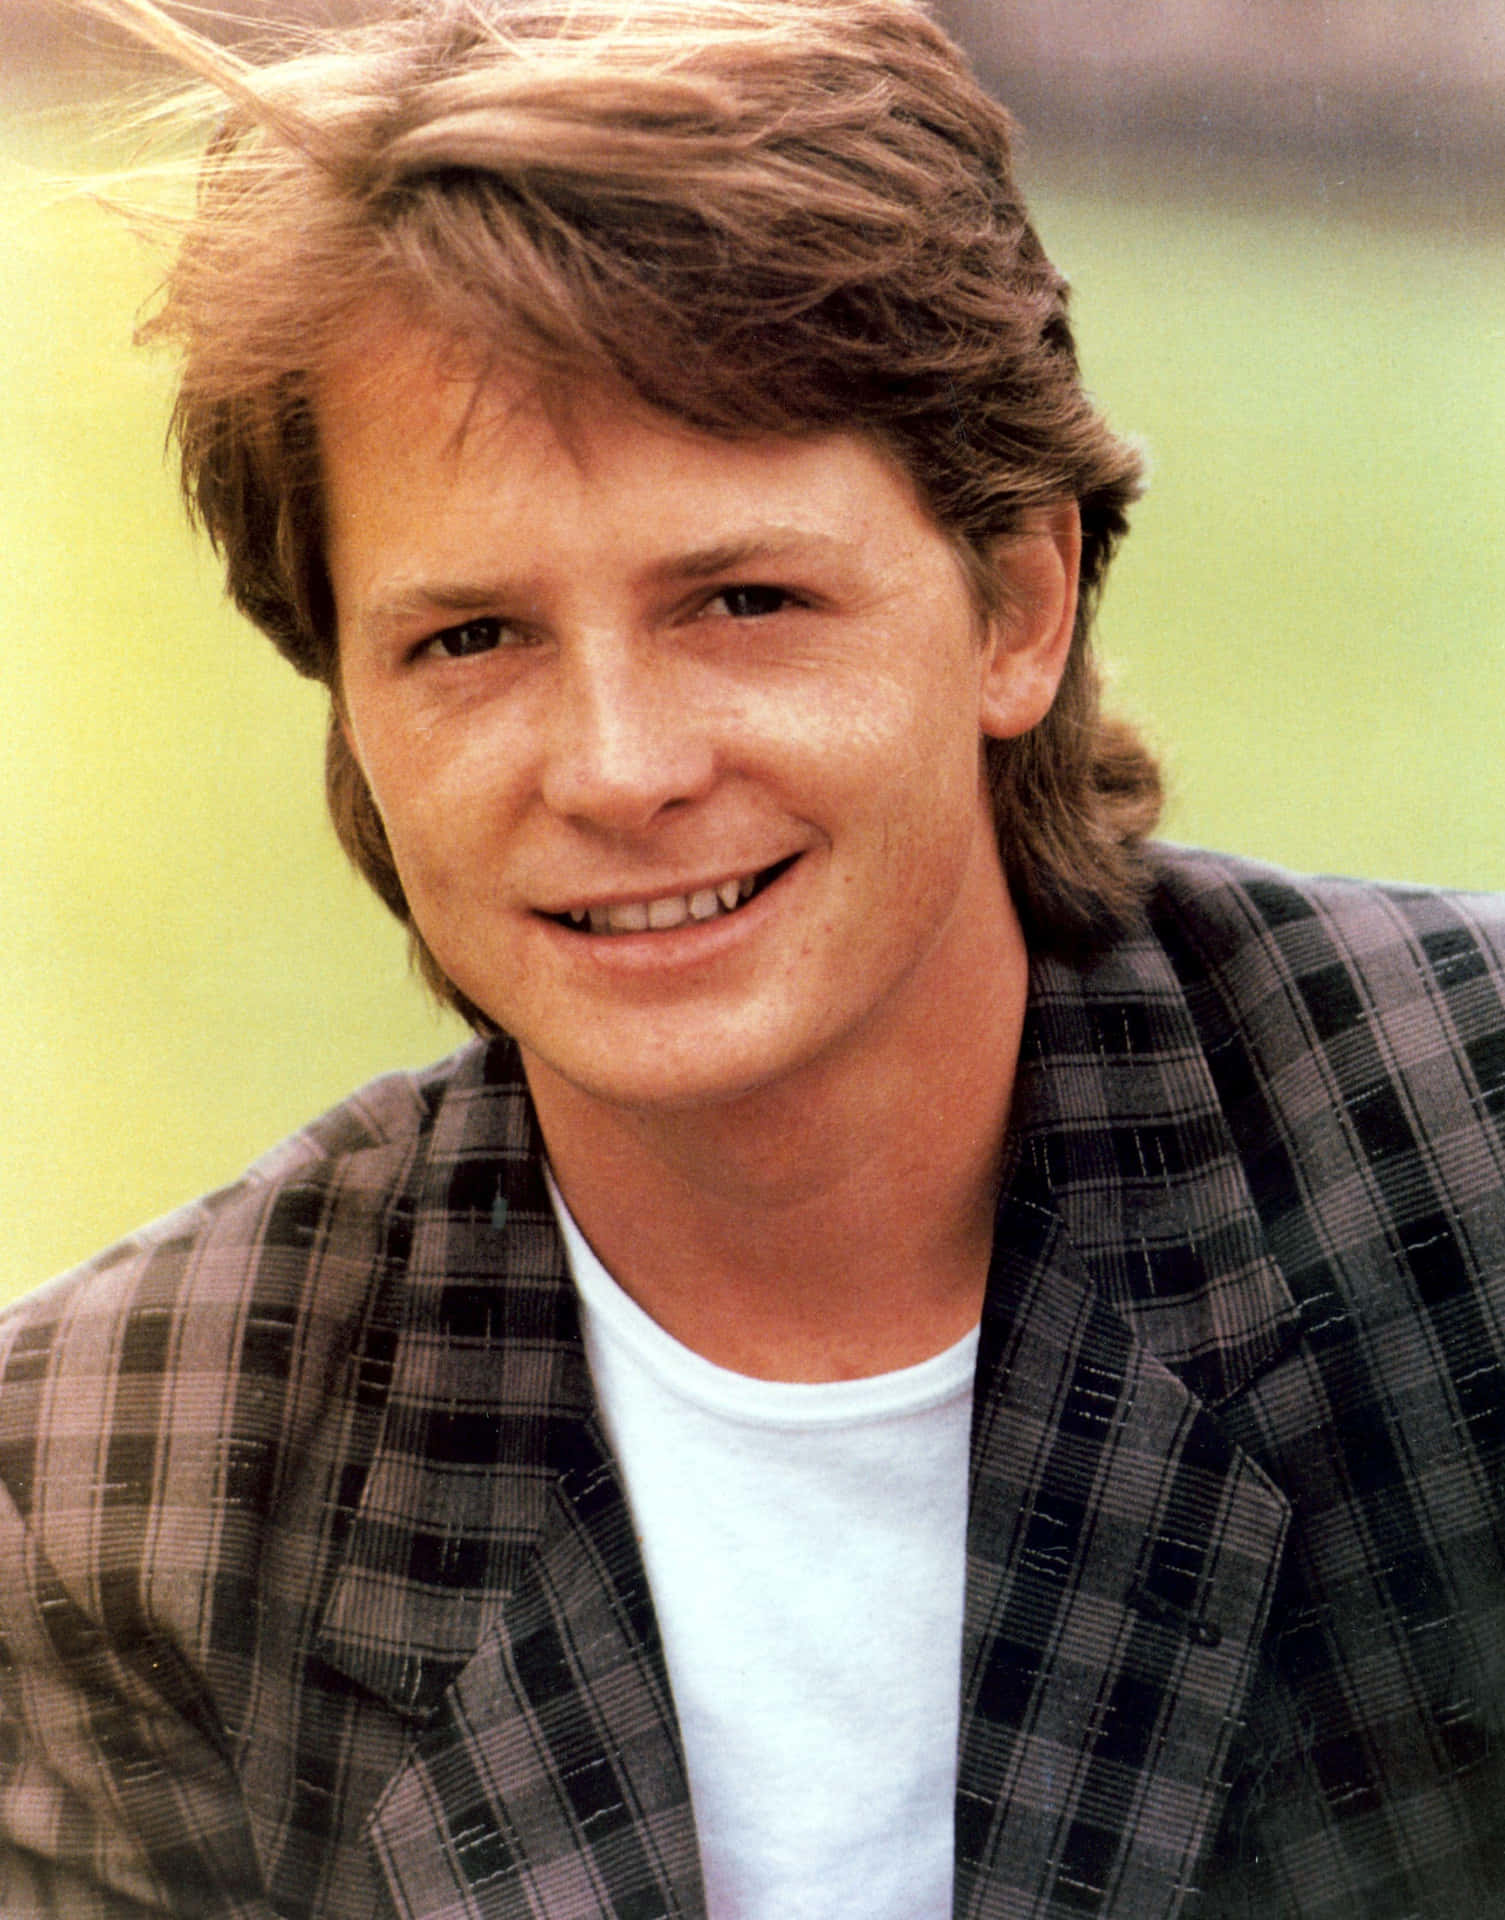 Michael J Fox In His Iconic 1986 Movie, Back To The Future